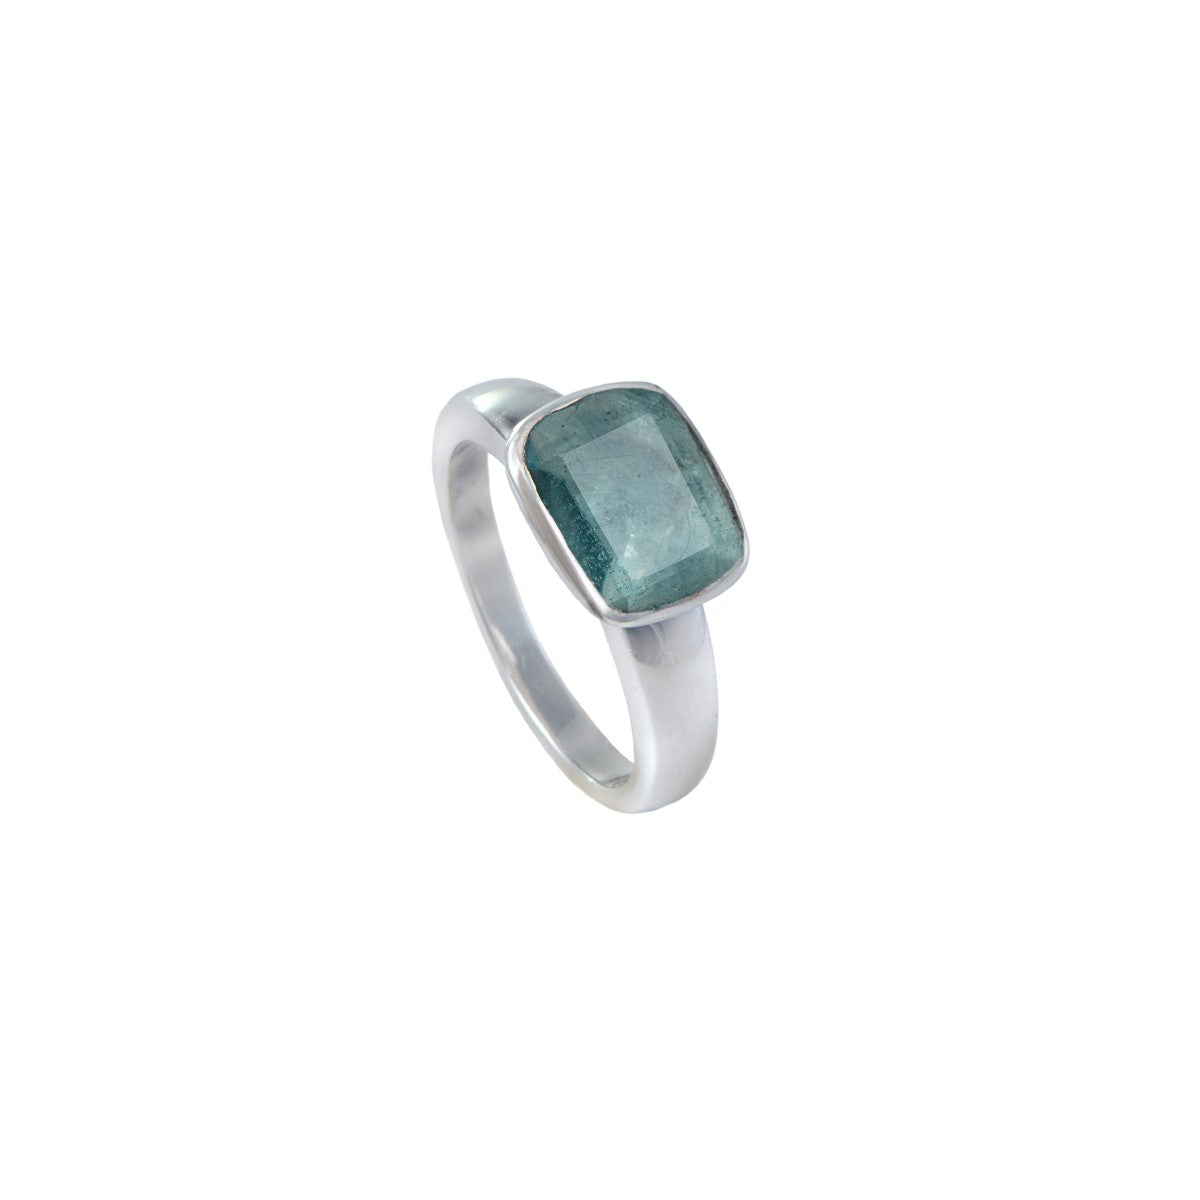 Faceted Rectangular Cut Natural Gemstone Sterling Silver Ring - Apatite